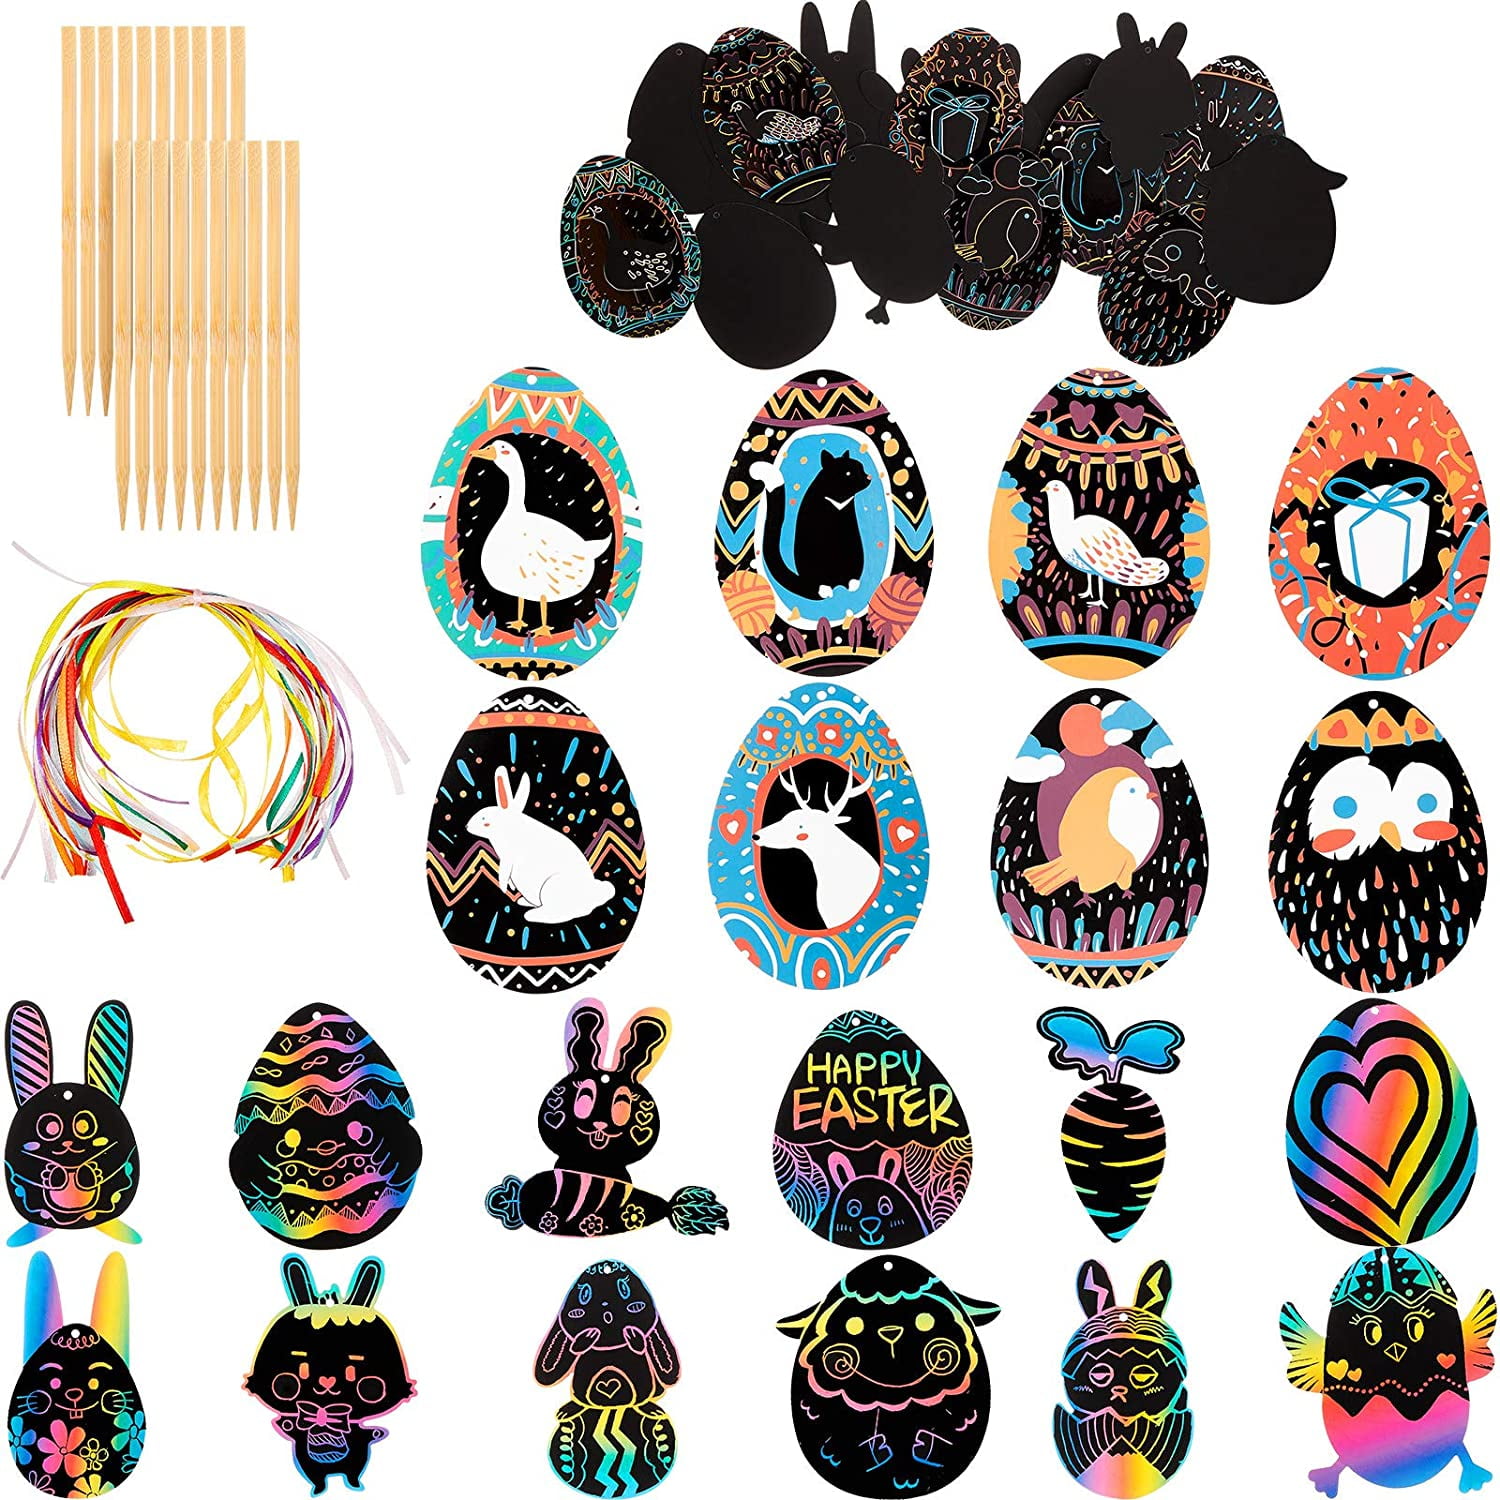 Details about   Home DIY Bunny Happy Decoration Easter Egg Wooden Decoration Party 